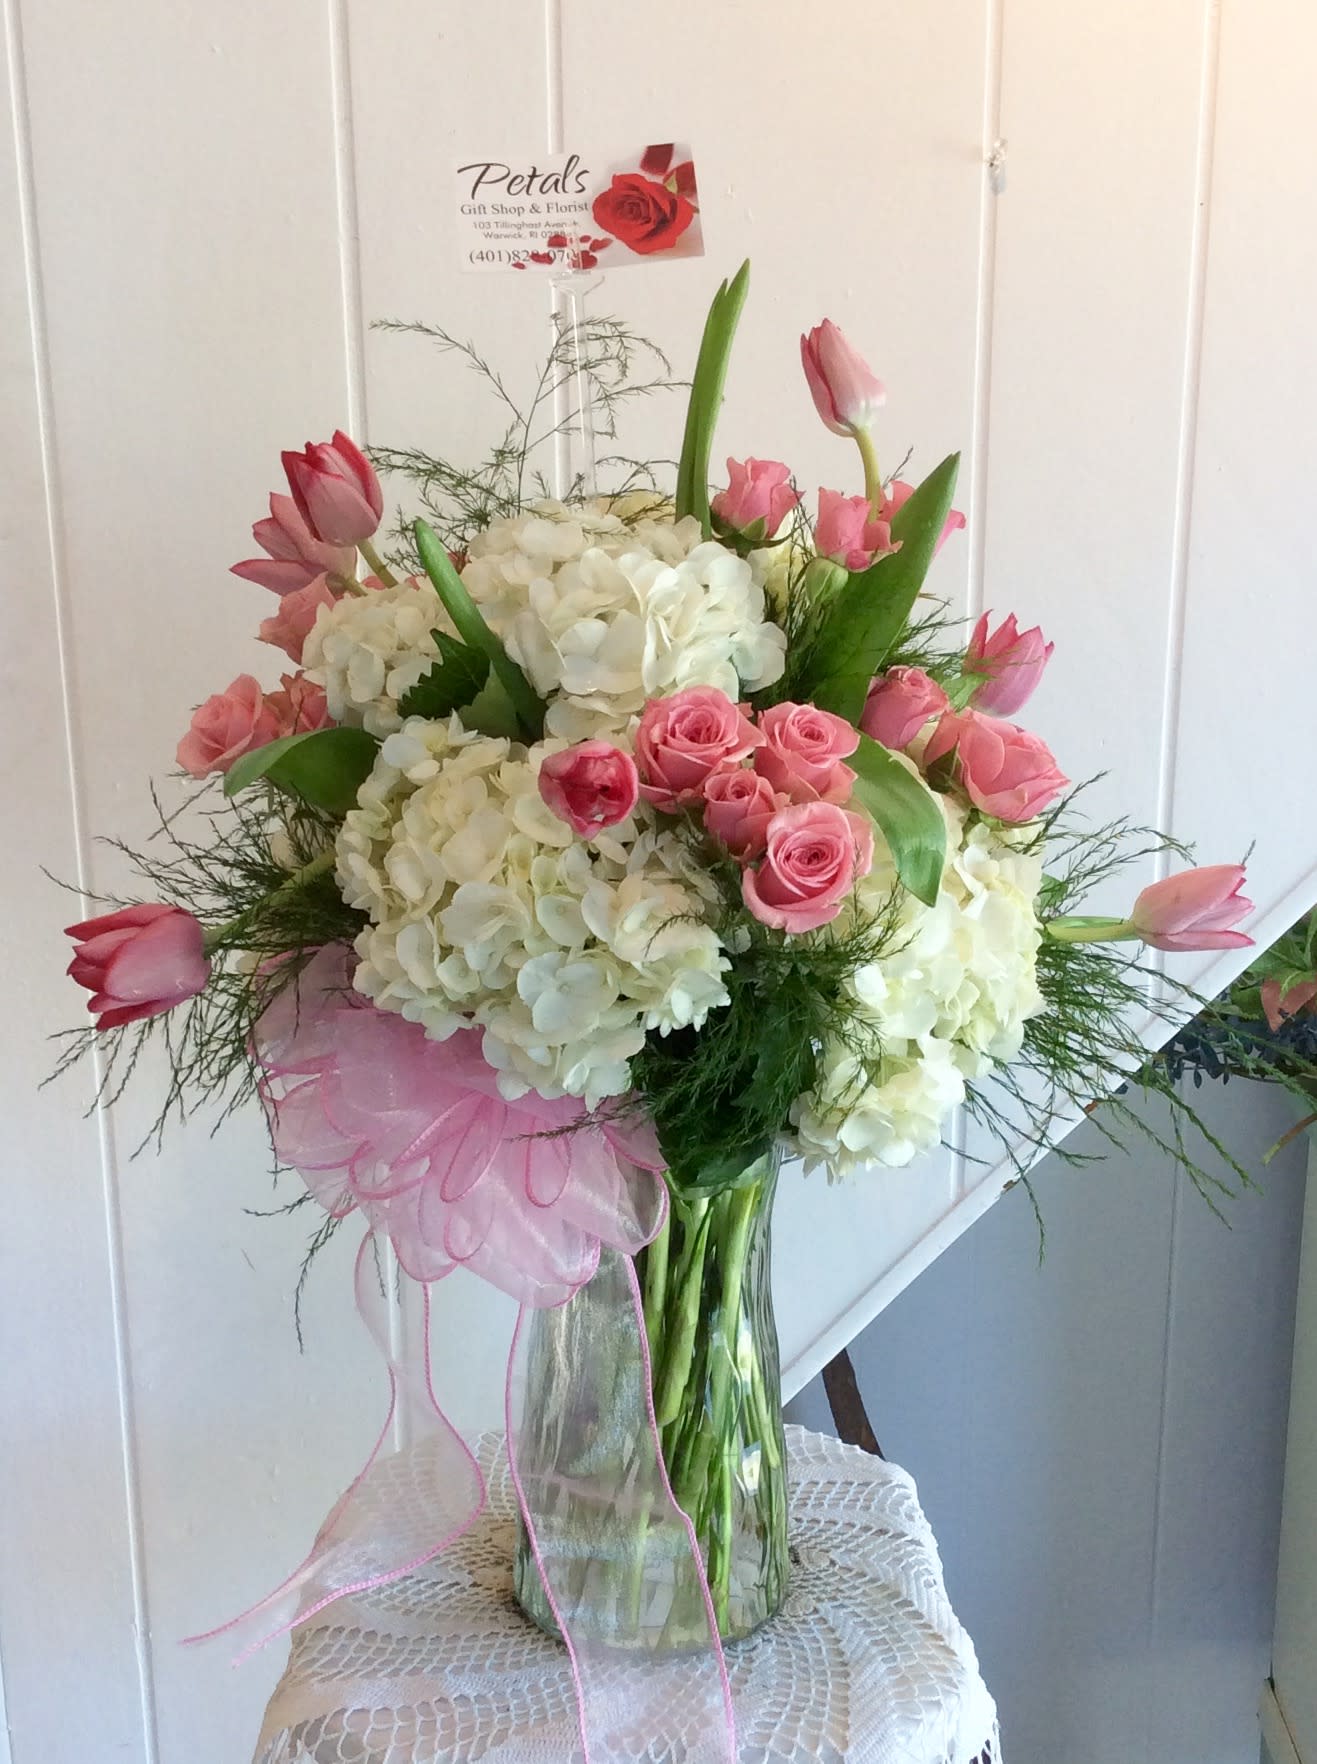 Pretty As A Picture Pink Spray Roses And White Hydrangeas In Warwick Ri Petals Florist Gift Shop,Evaporated Milk Calories